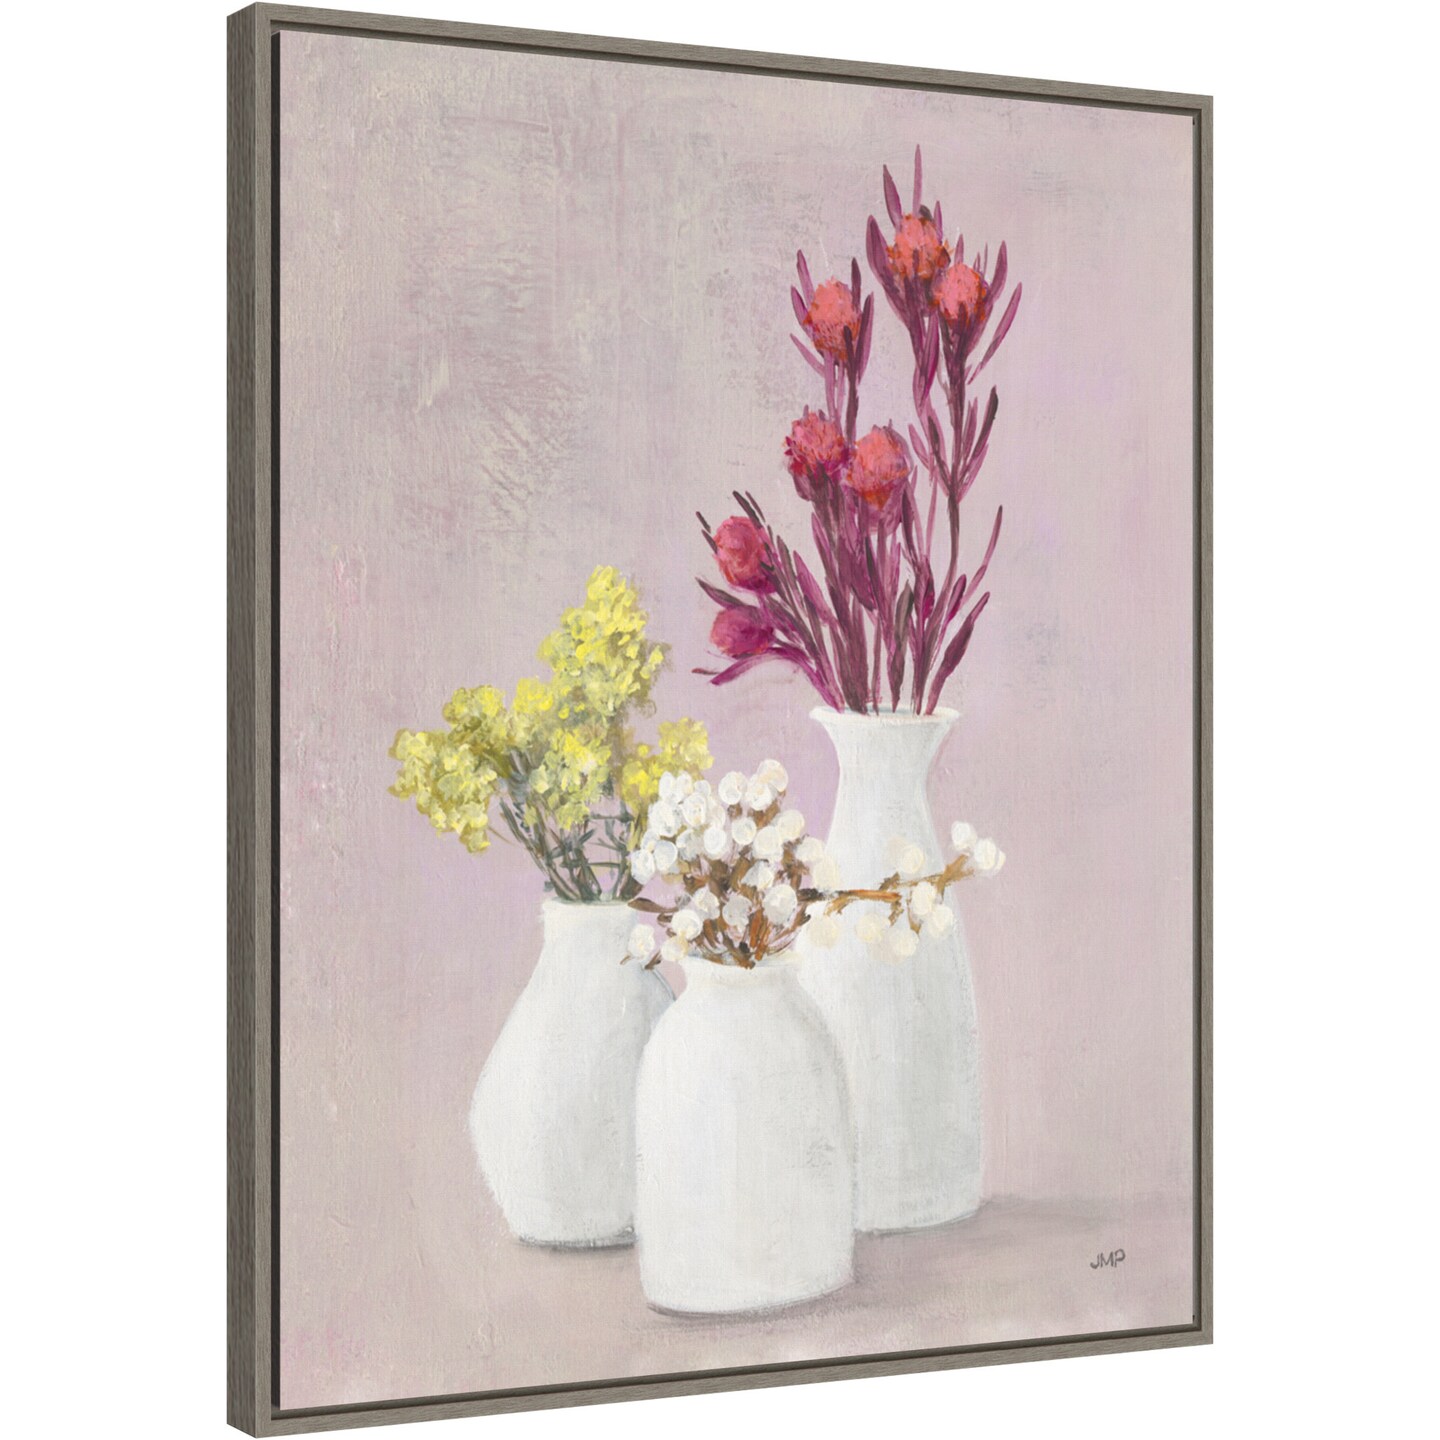 Autumn Greenhouse VII by Julia Purinton 23-in. W x 28-in. H. Canvas Wall Art Print Framed in Grey